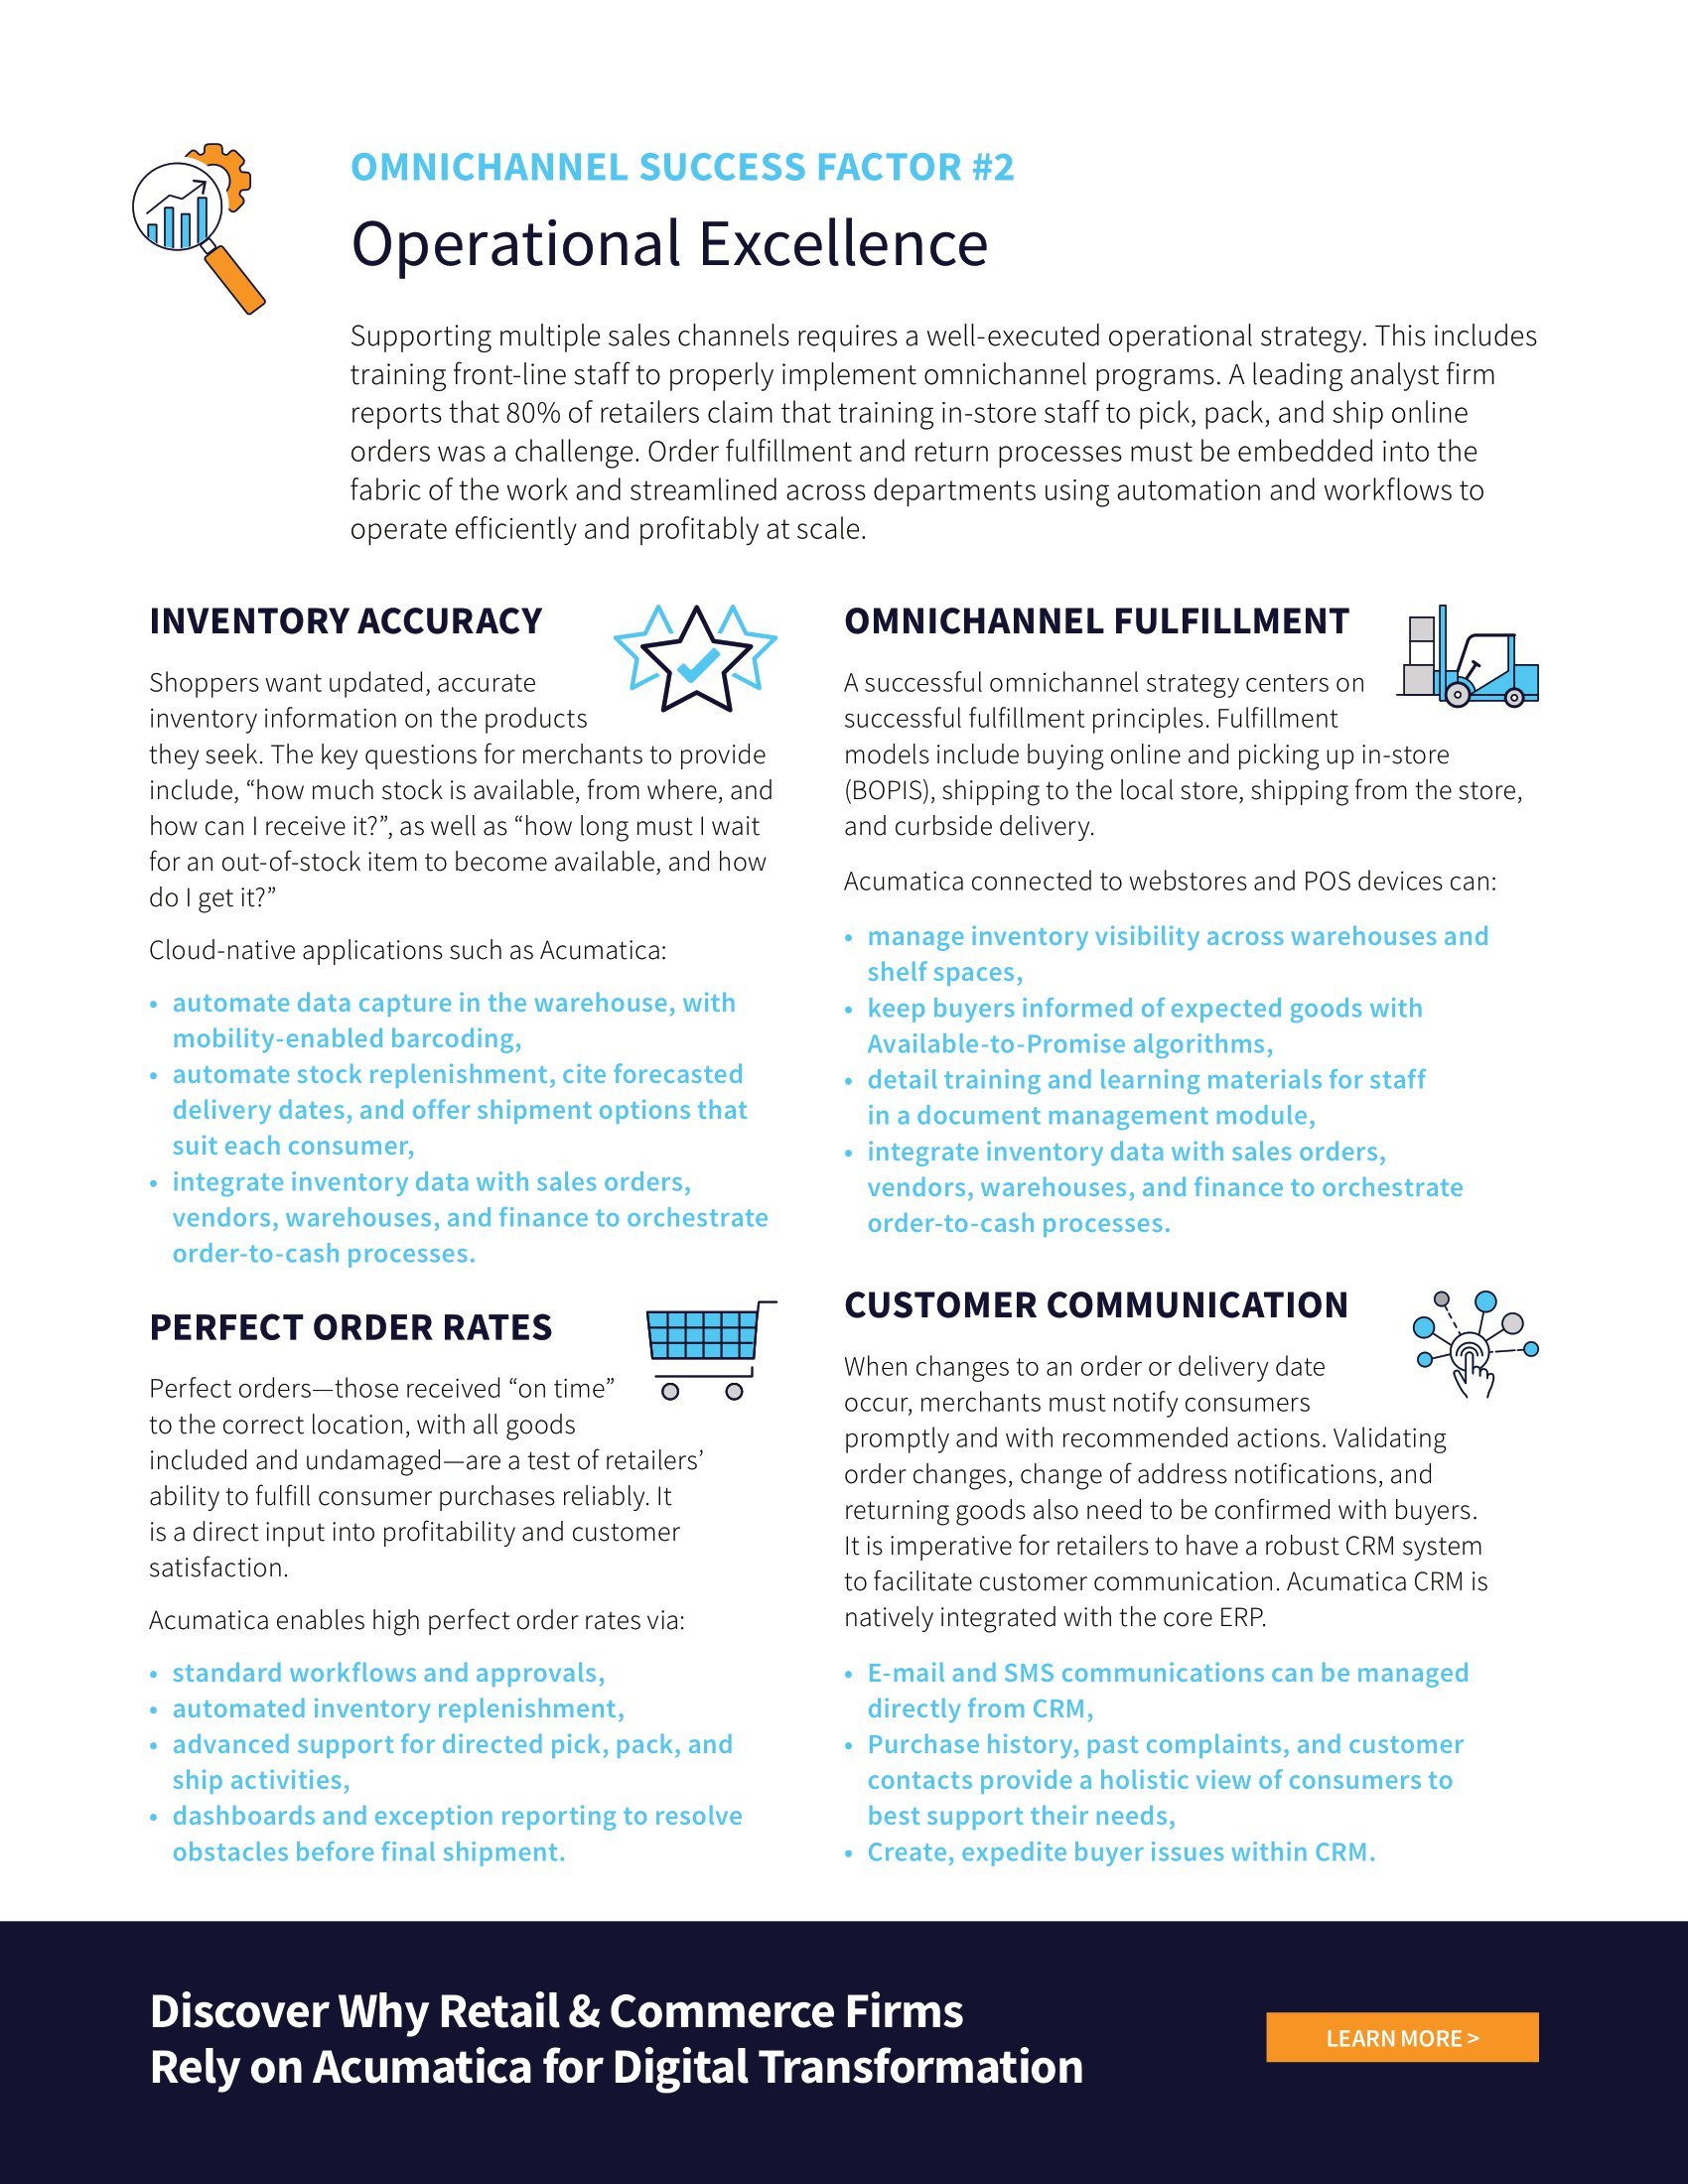 Evolve Your Omnichannel Strategy to Grow Your Business, page 2